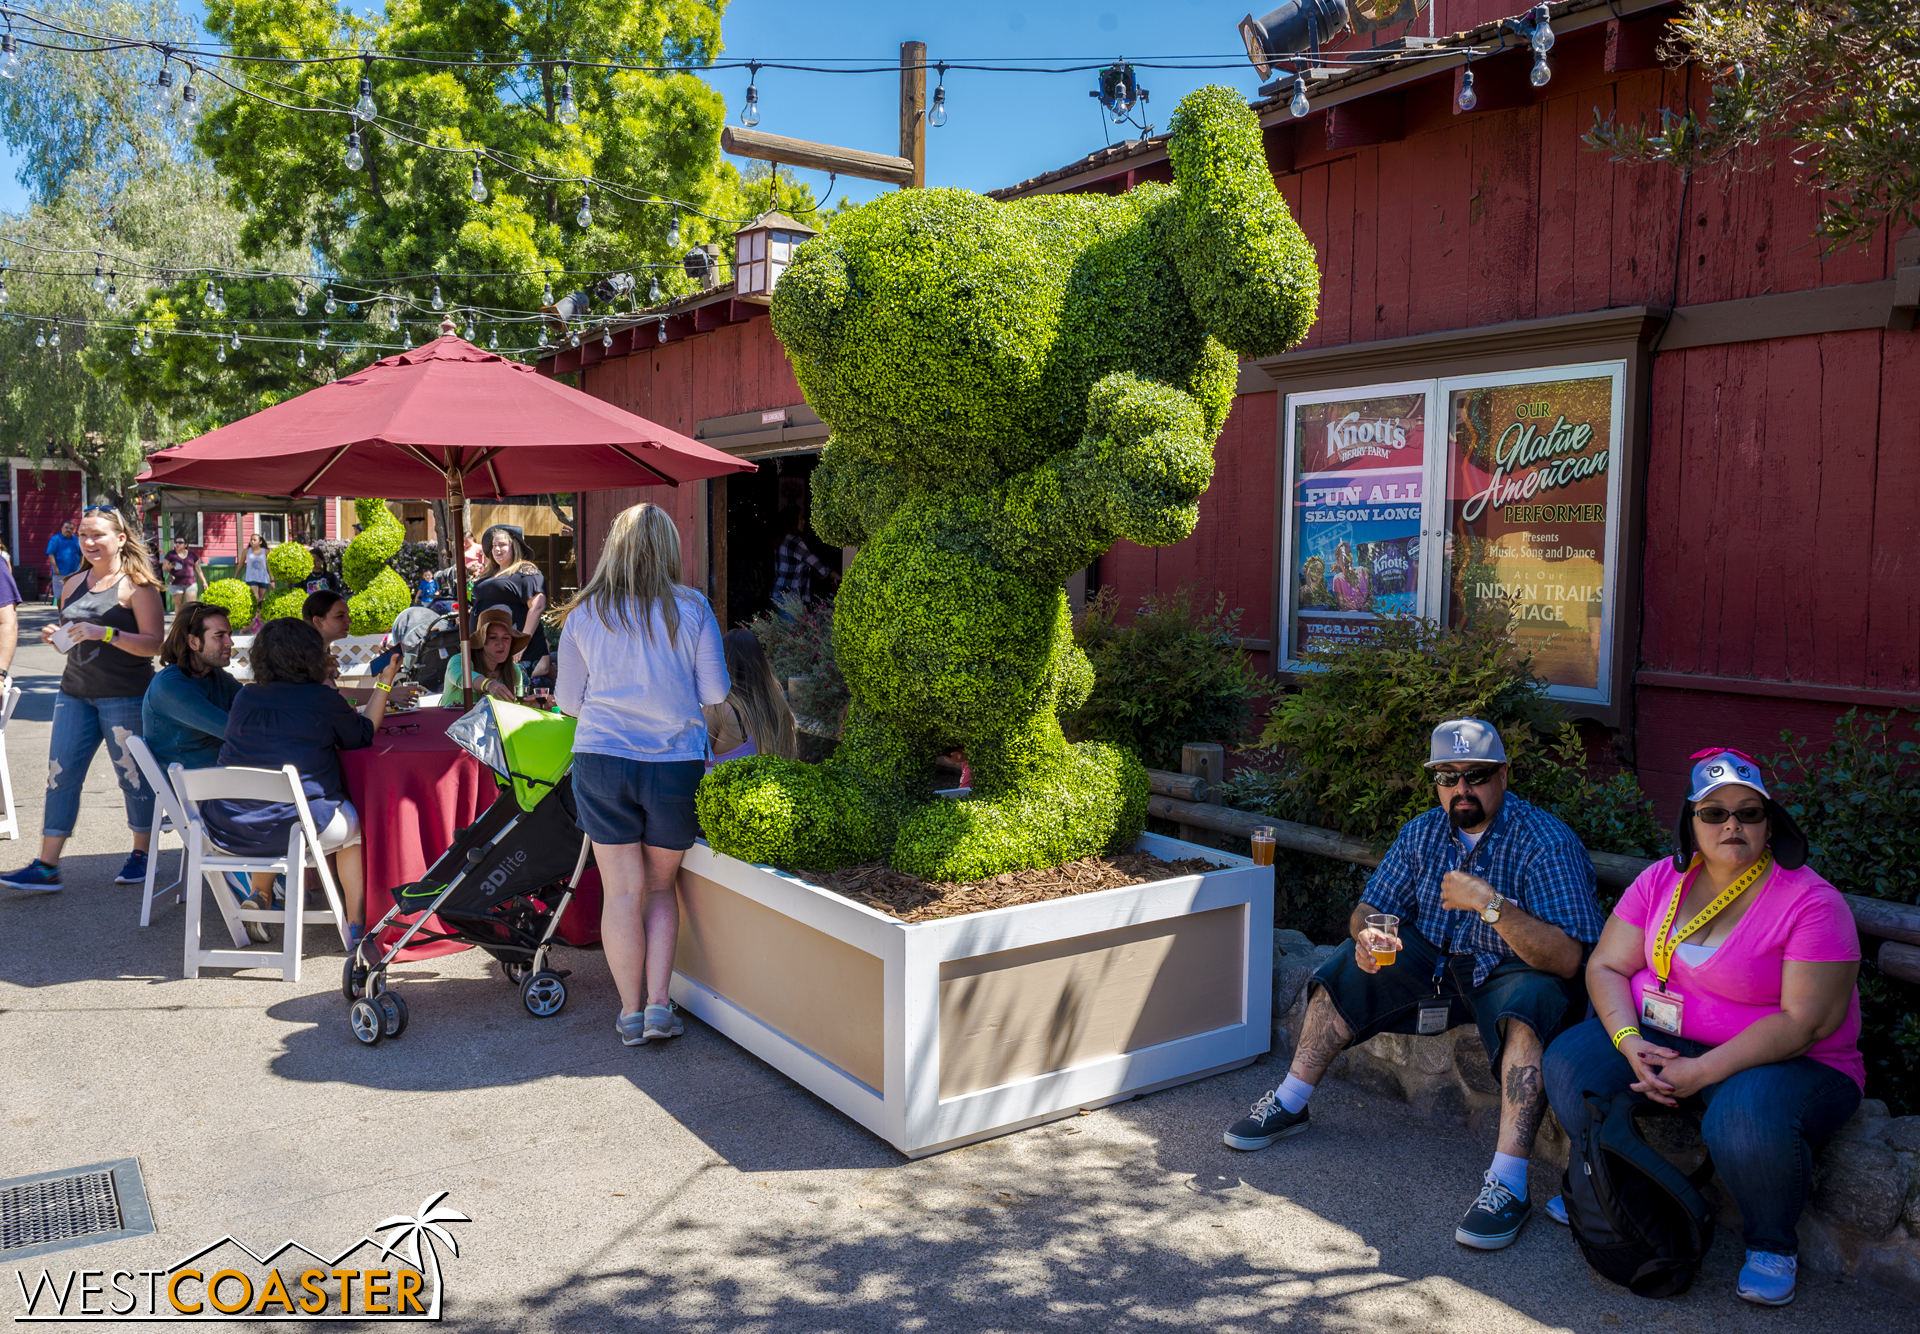  Some adorable topiaries help set the theming.&nbsp; I mean, c'mon... Snoopy!! 